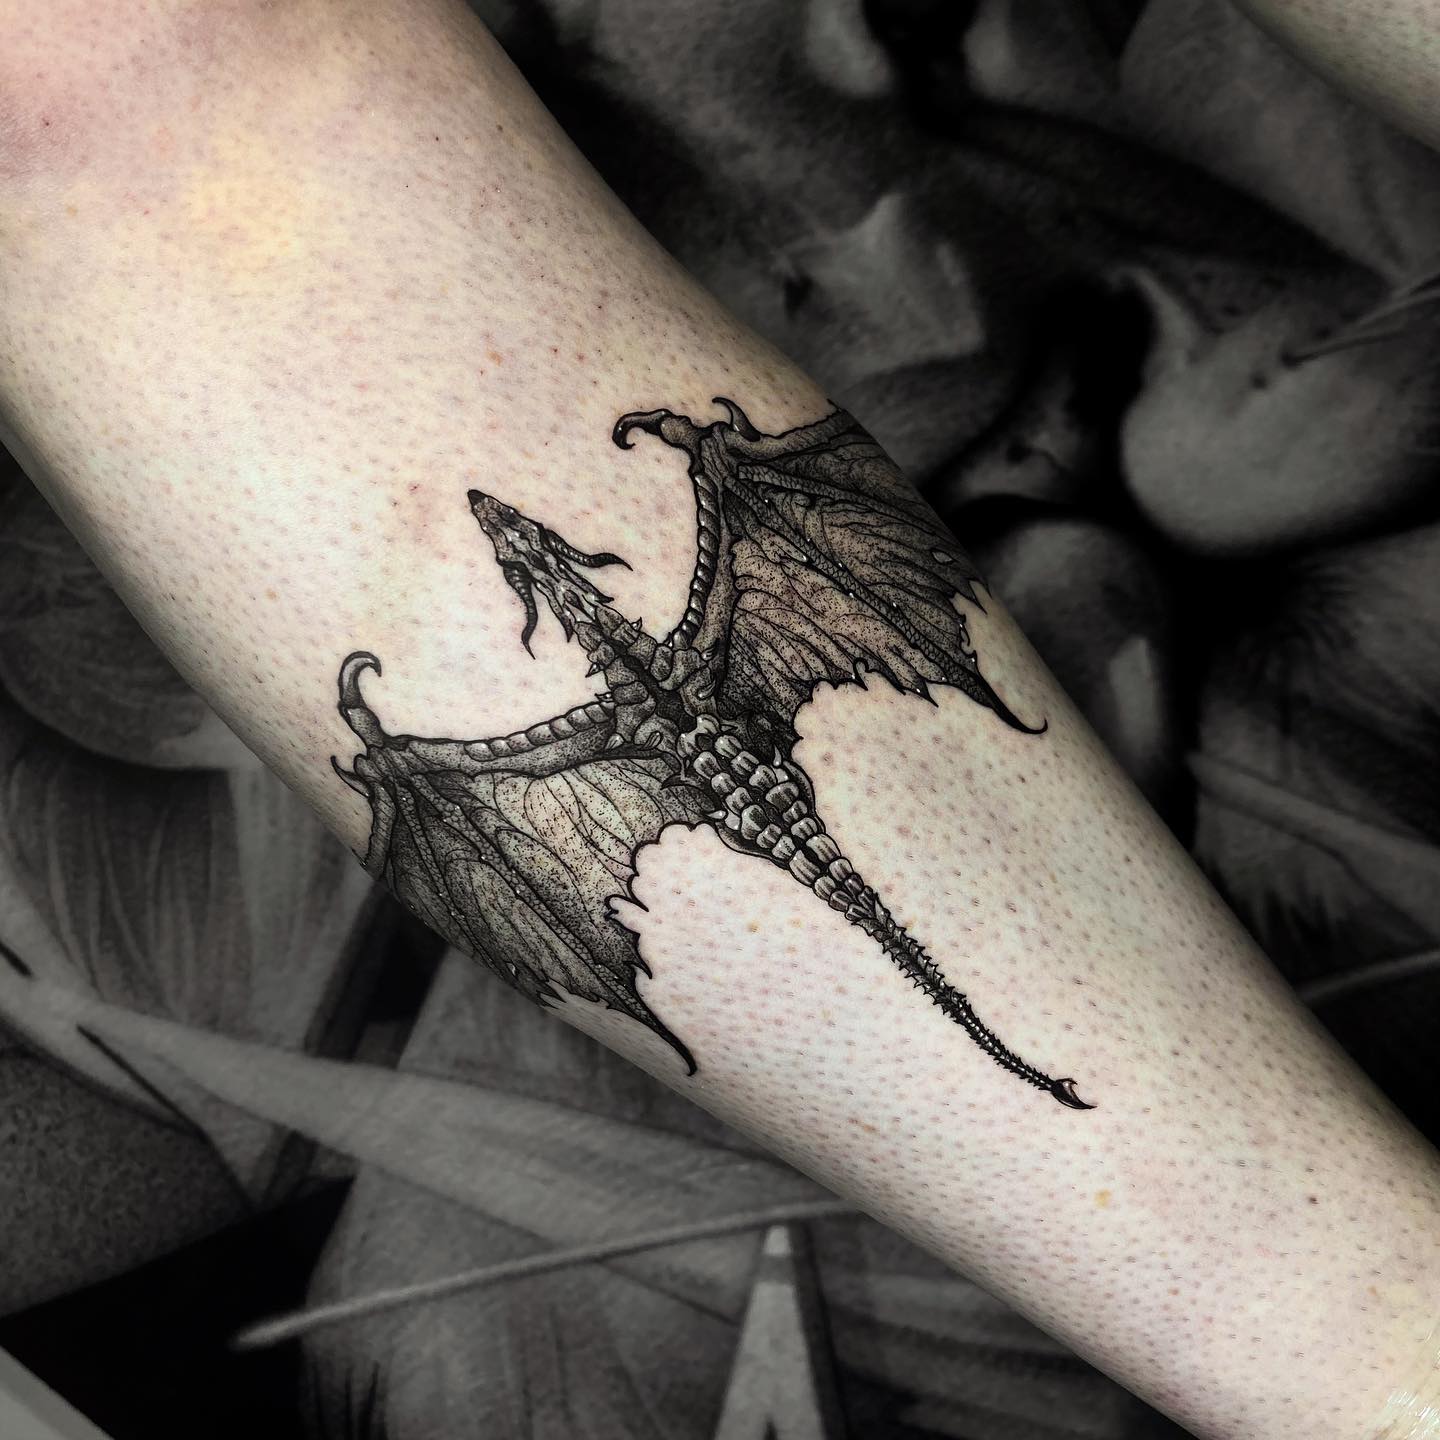 Small dragon tattoo by anddraw.ink